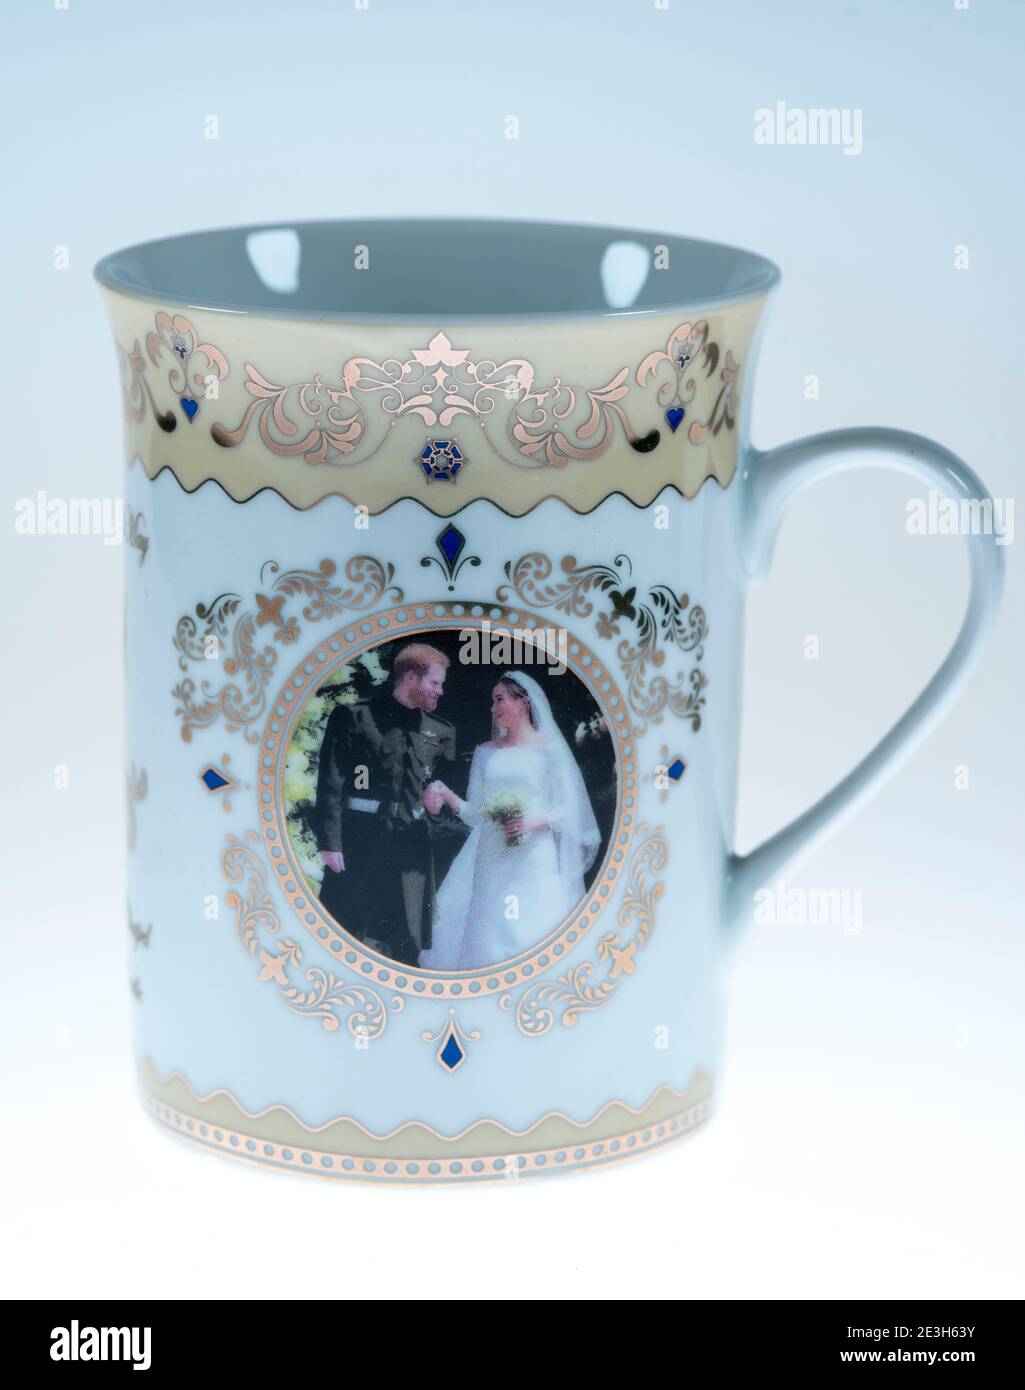 Souvenir mug for the wedding of Prince Harry and Meghan Markle, at Windsor Castle on 19 May 2018, British Royals, Stock Photo